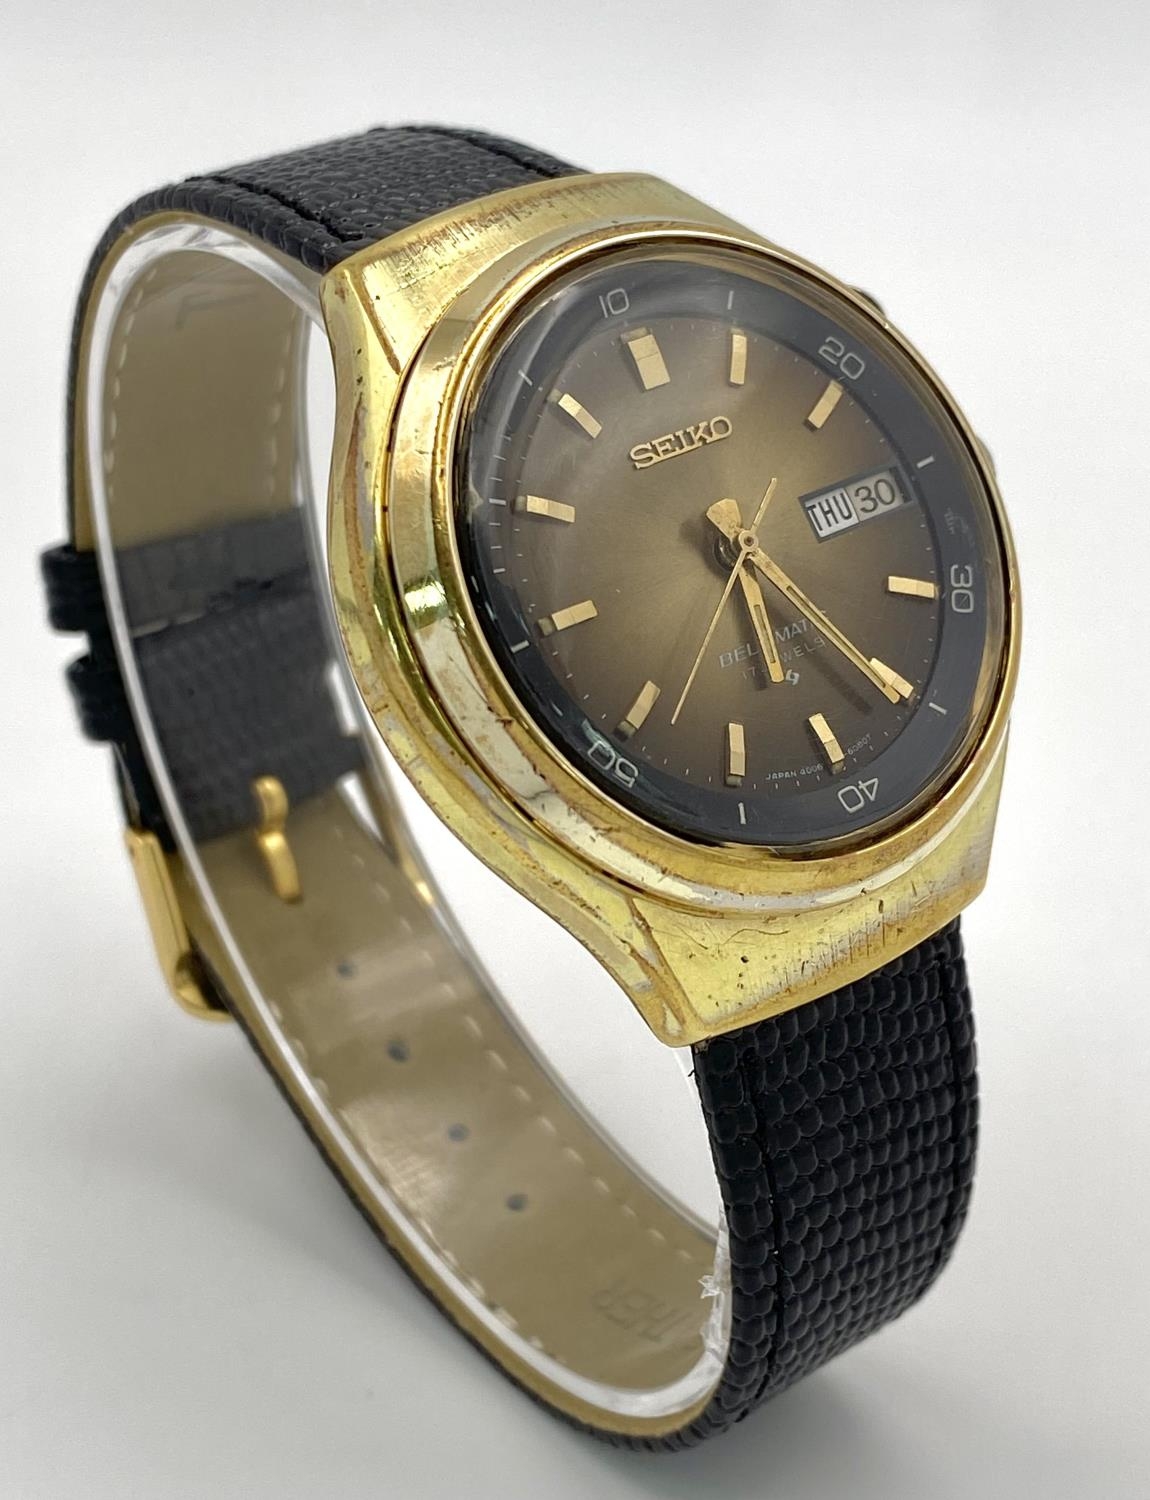 A Vintage Seiko Bell-Matic 17 Jewels Automatic Gents Watch. Black leather strap. Gilded case - 38mm. - Image 6 of 8